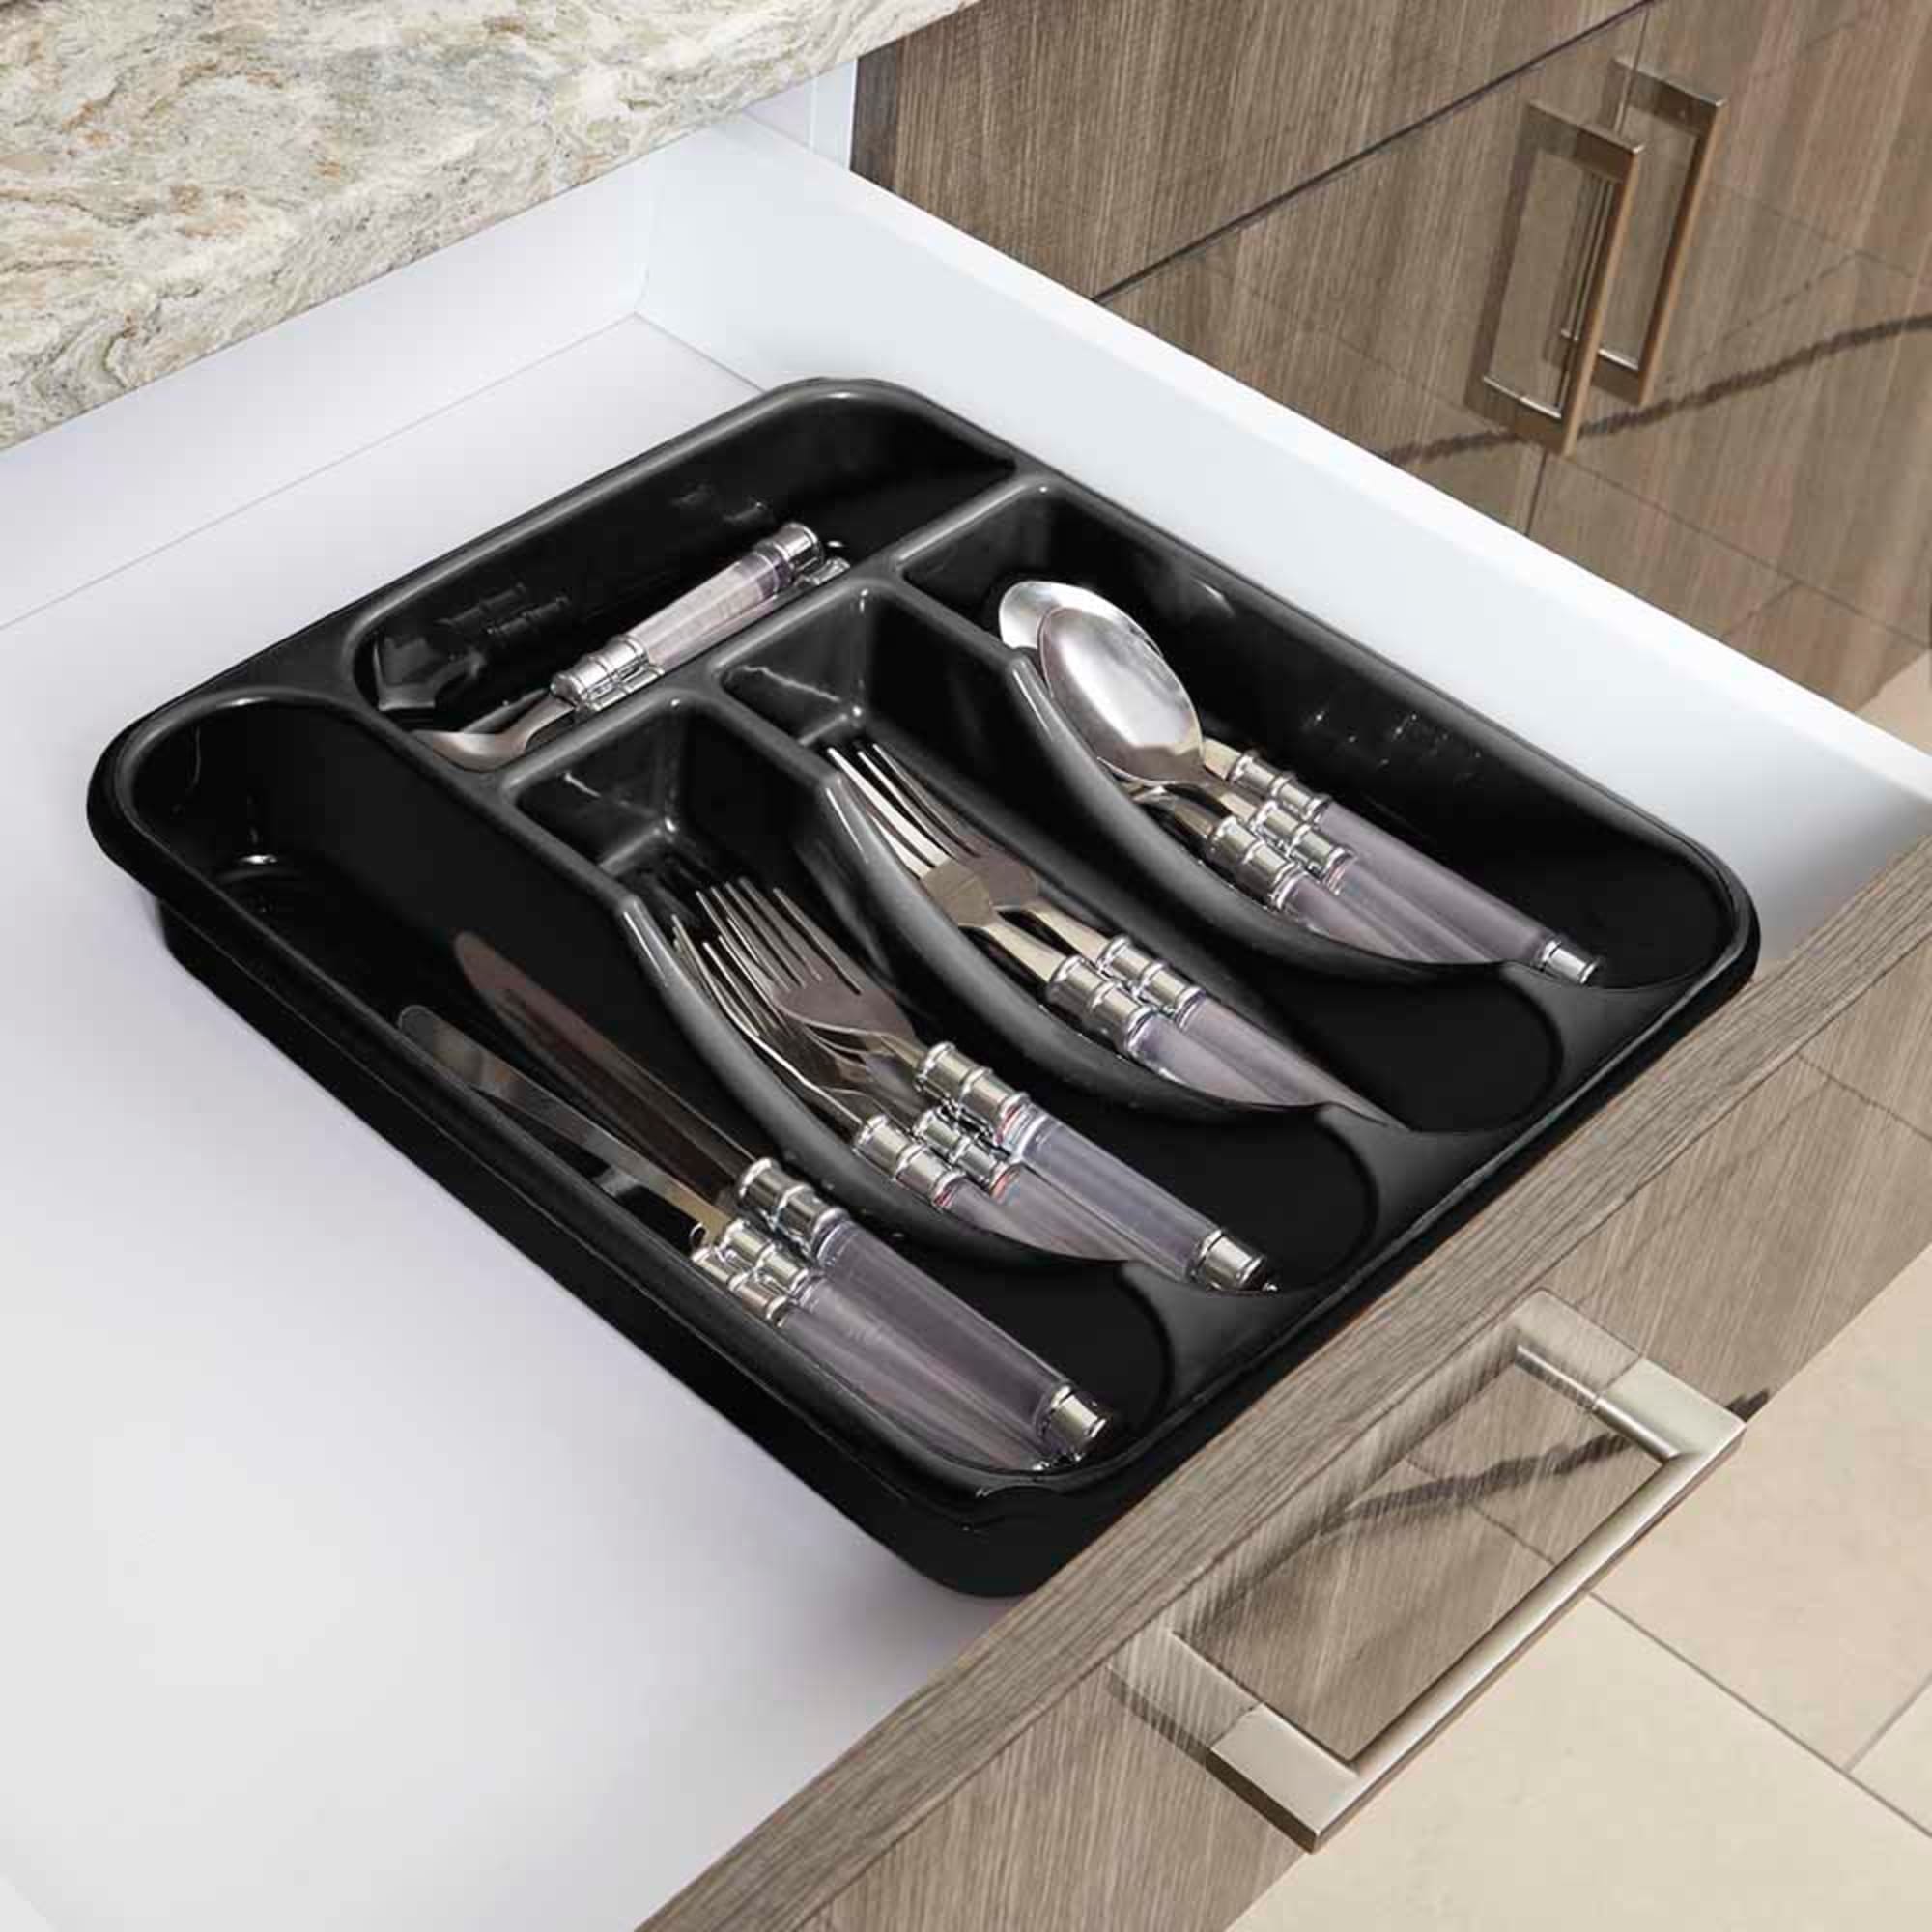 Home Basics 7 Textured Compartment Plastic Cutlery Tray $3.00 EACH, CASE PACK OF 12